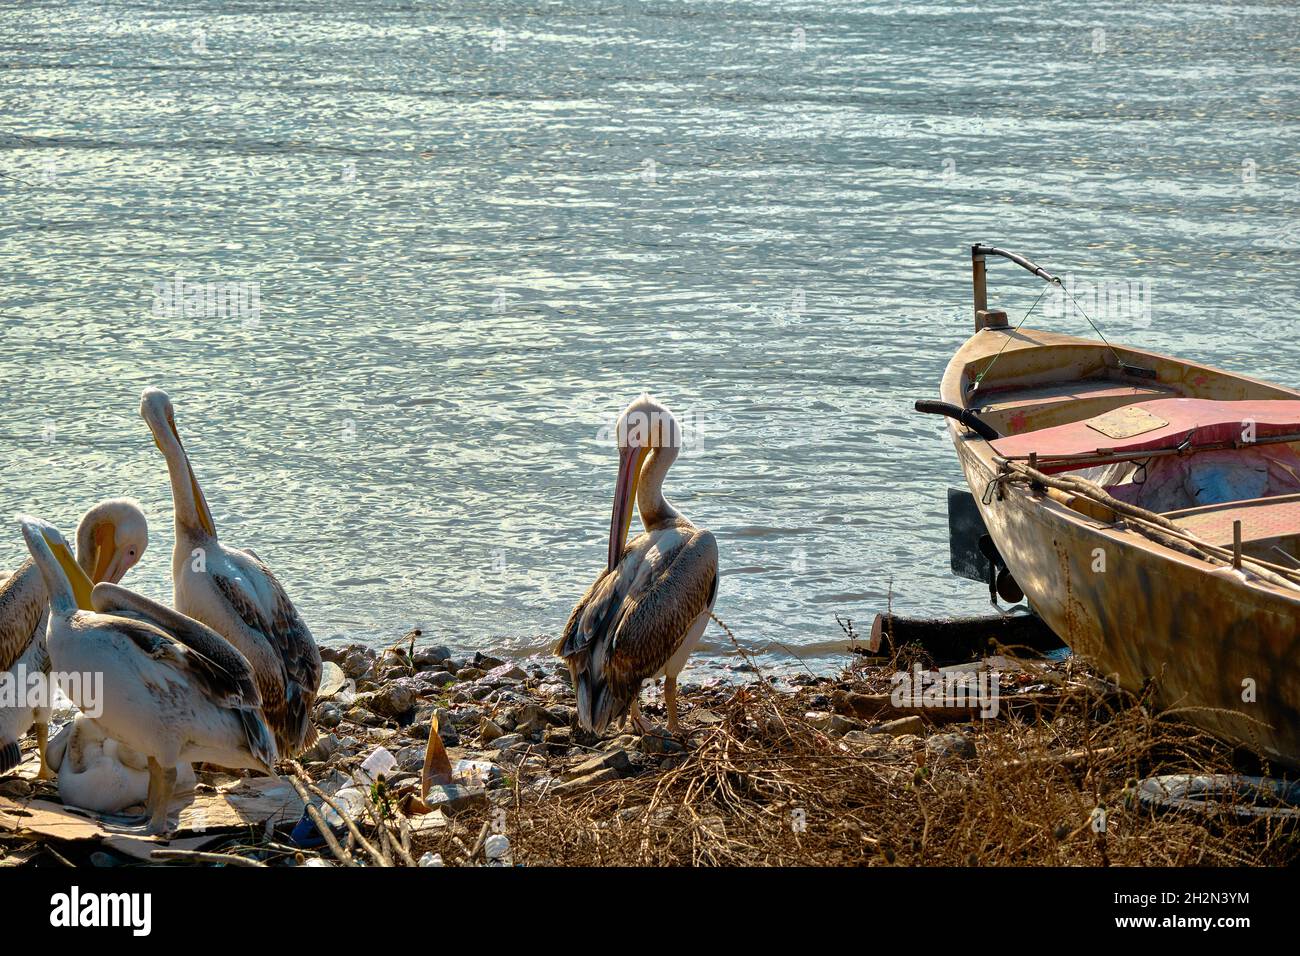 Groups of big birds storks and pelicans and small vintage and retro style fishing boat in front of the uluabat lake in bursa during sunny day. Stock Photo